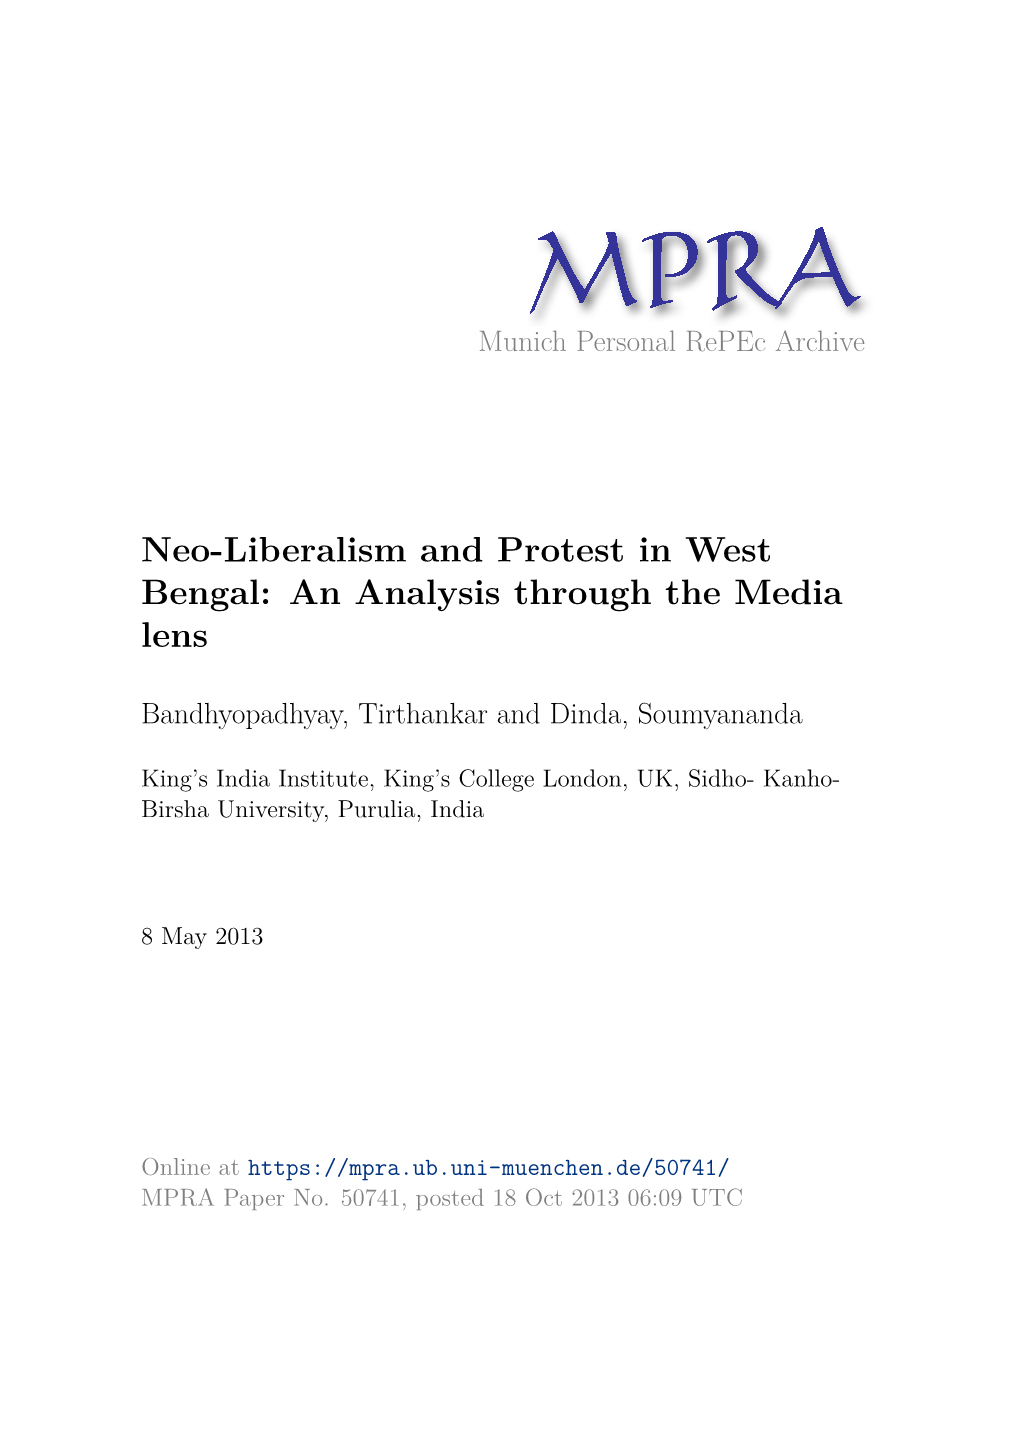 Neo-Liberalism and Protest in West Bengal: an Analysis Through the Media Lens